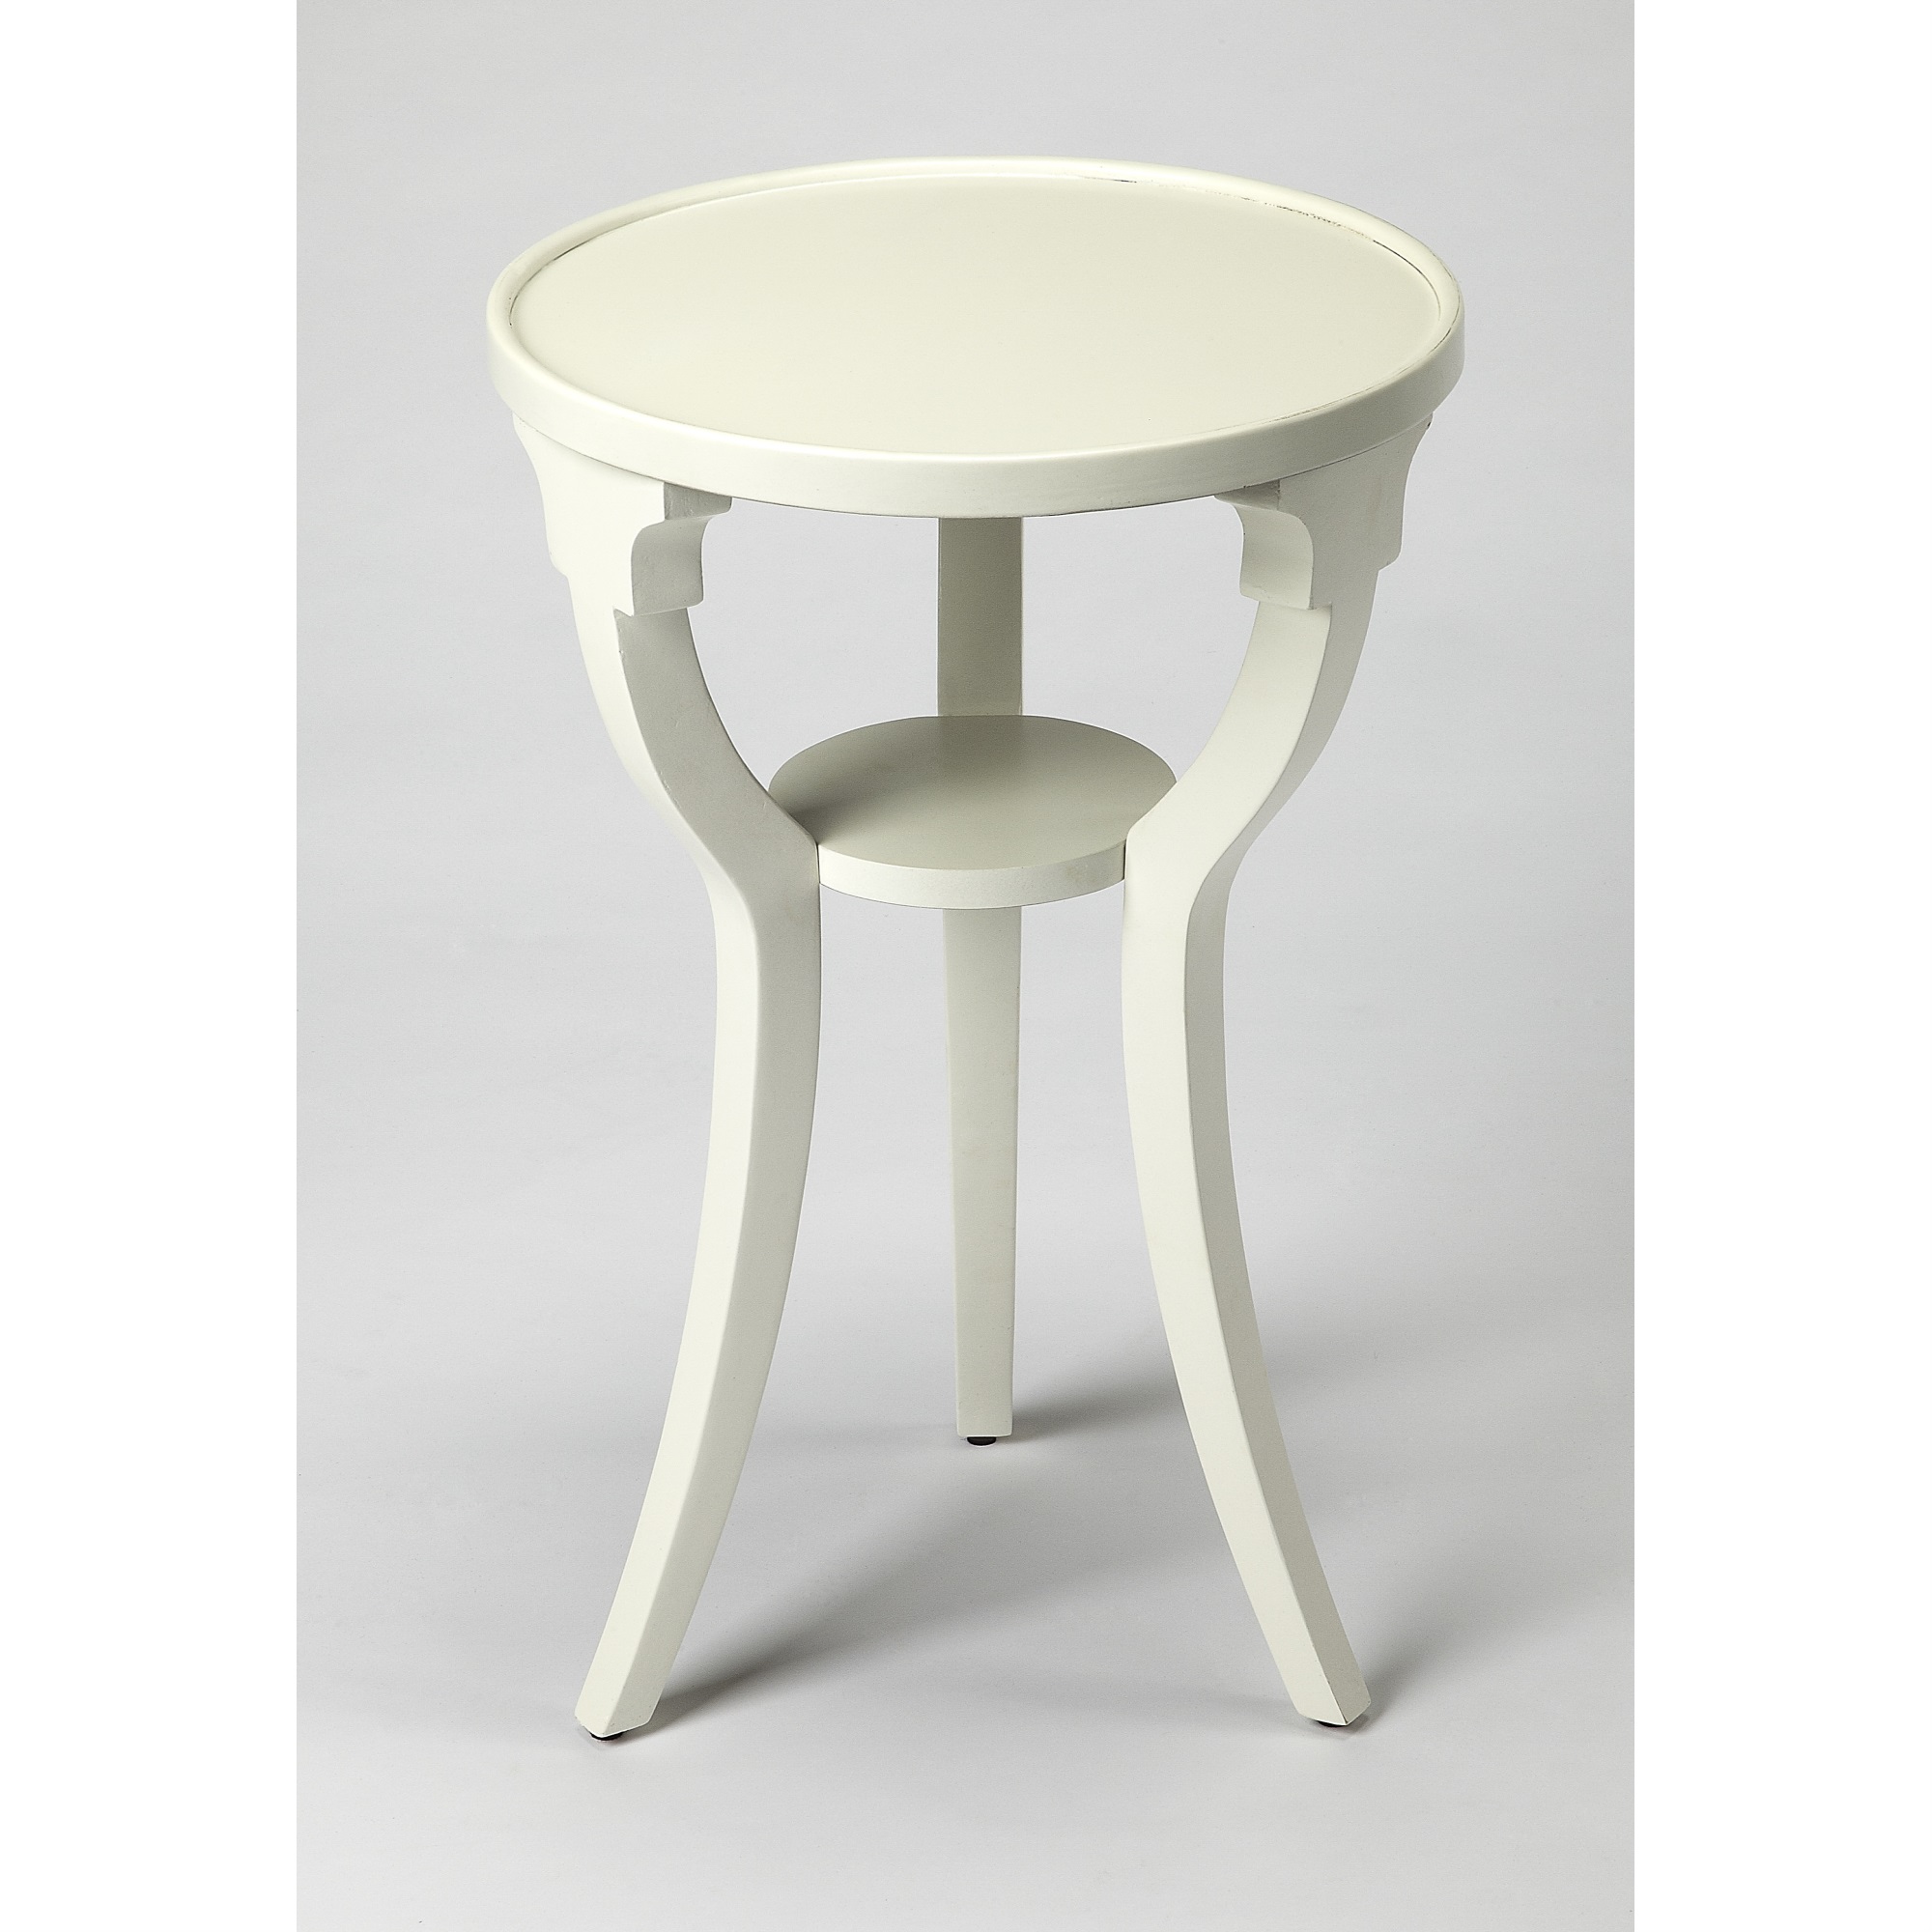 Butler Specialty Company Butler Essentials Butler Dalton Cottage White Round Accent Table